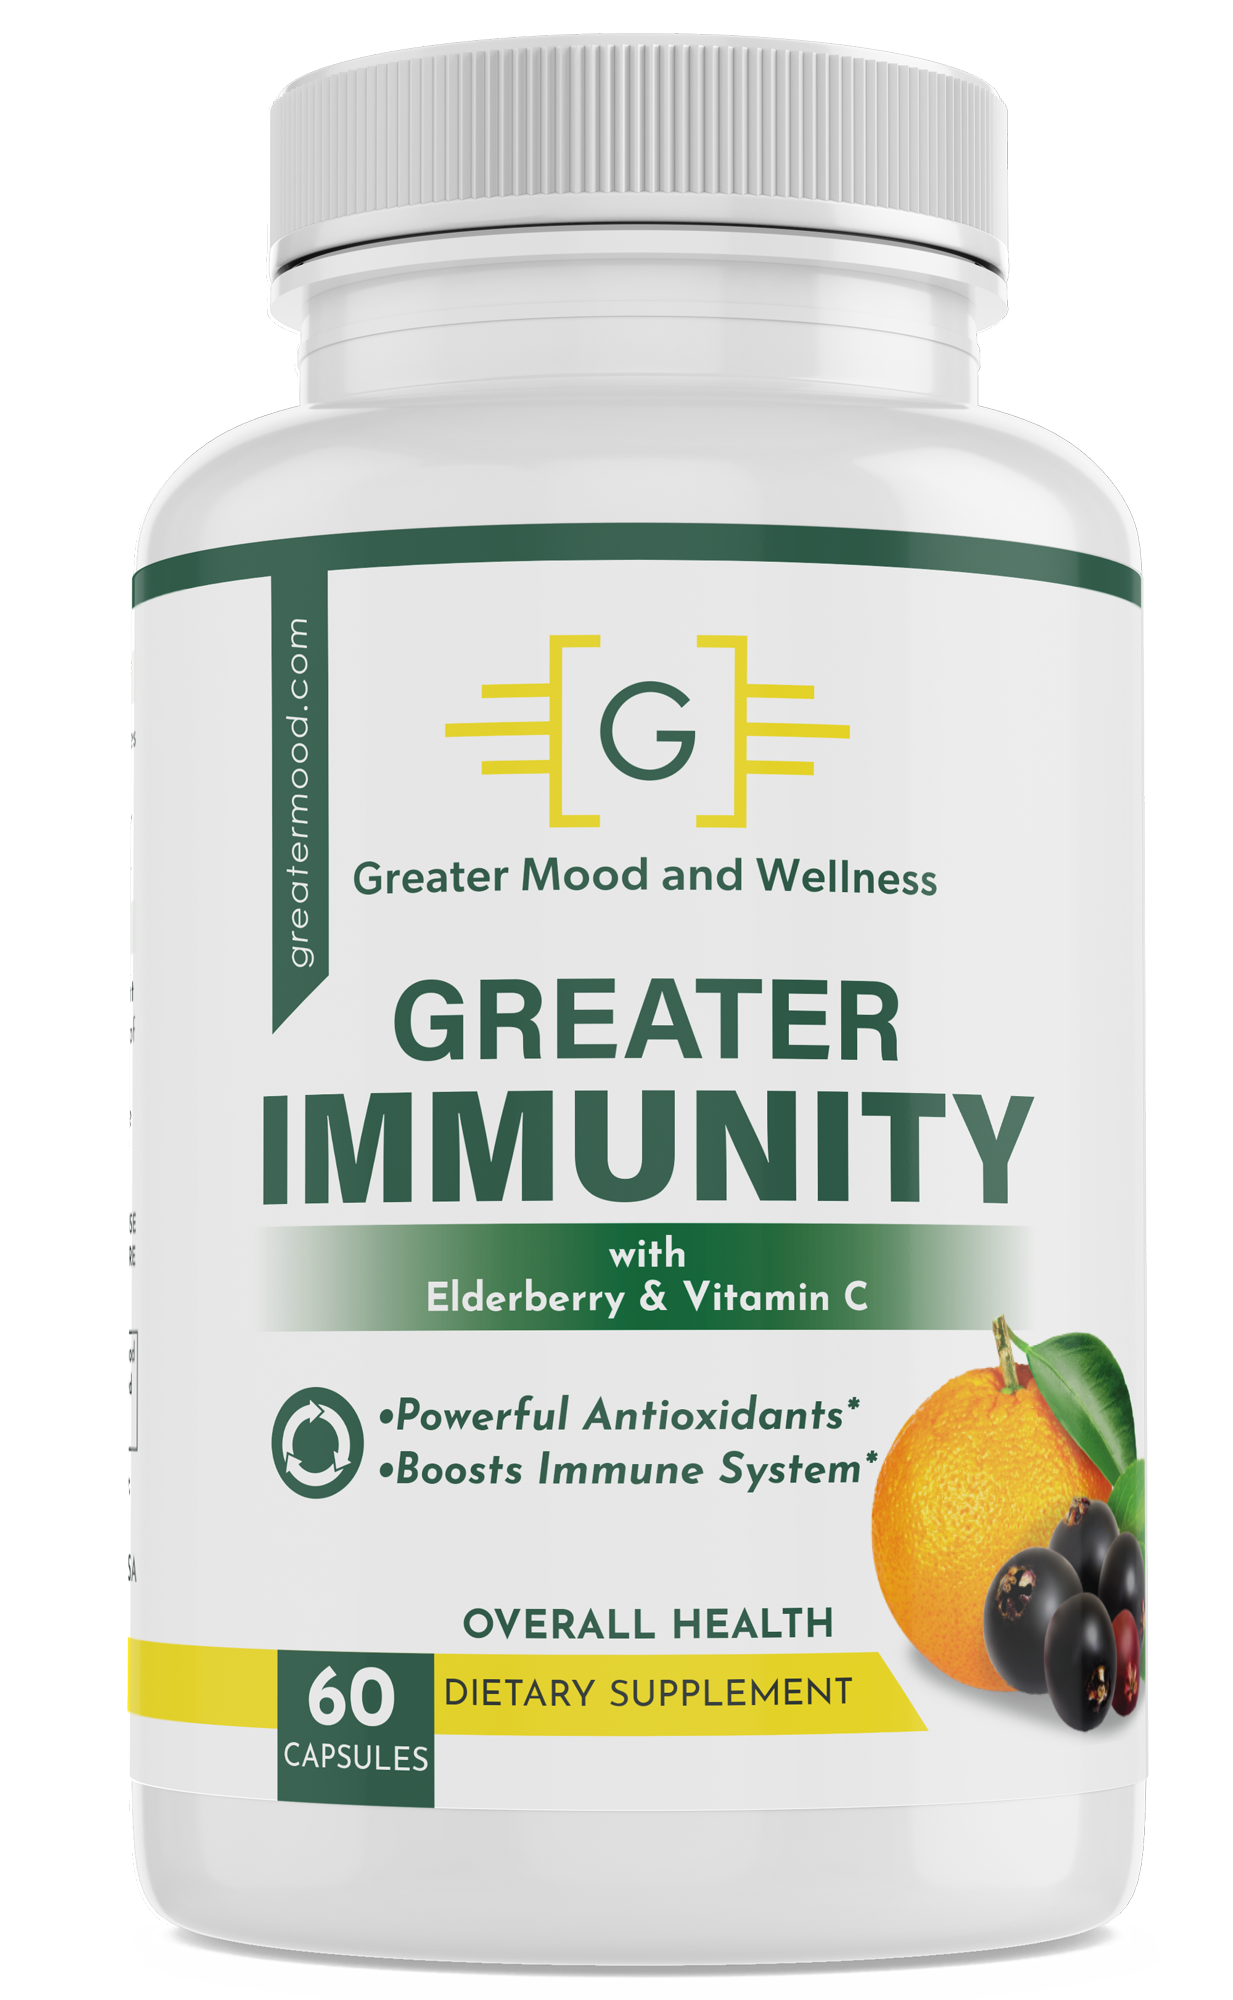 yellow, green and white supplement bottle with greater immunity supplement